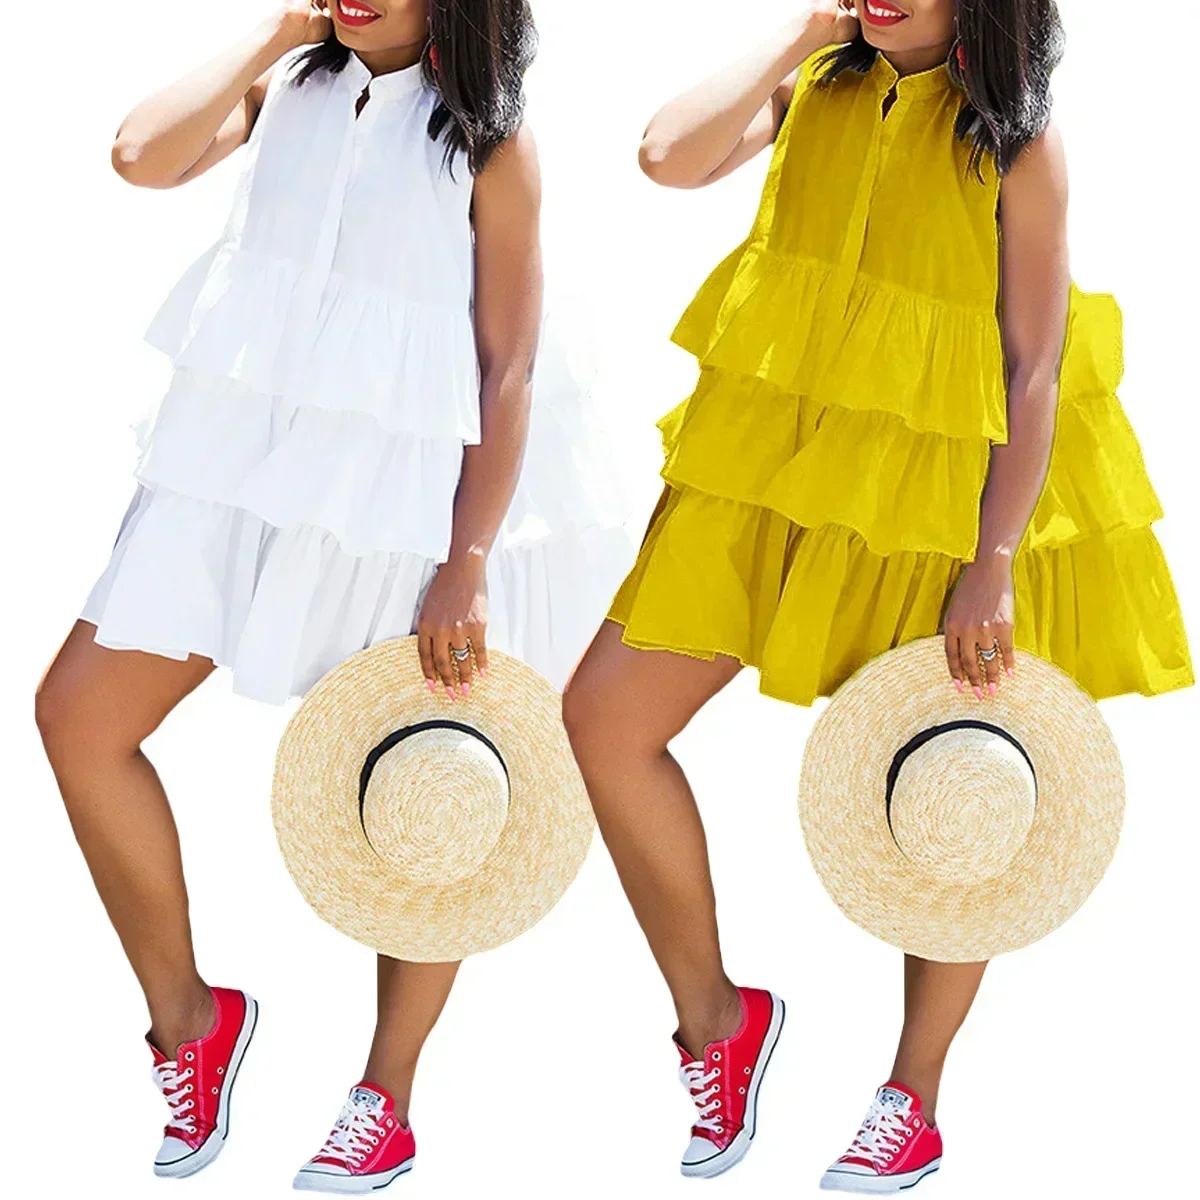 

S-3XL African Dresses for Women Summer Fashion African Sleeveless Polyester Yellow White Mini Dress Dashiki African Clothing